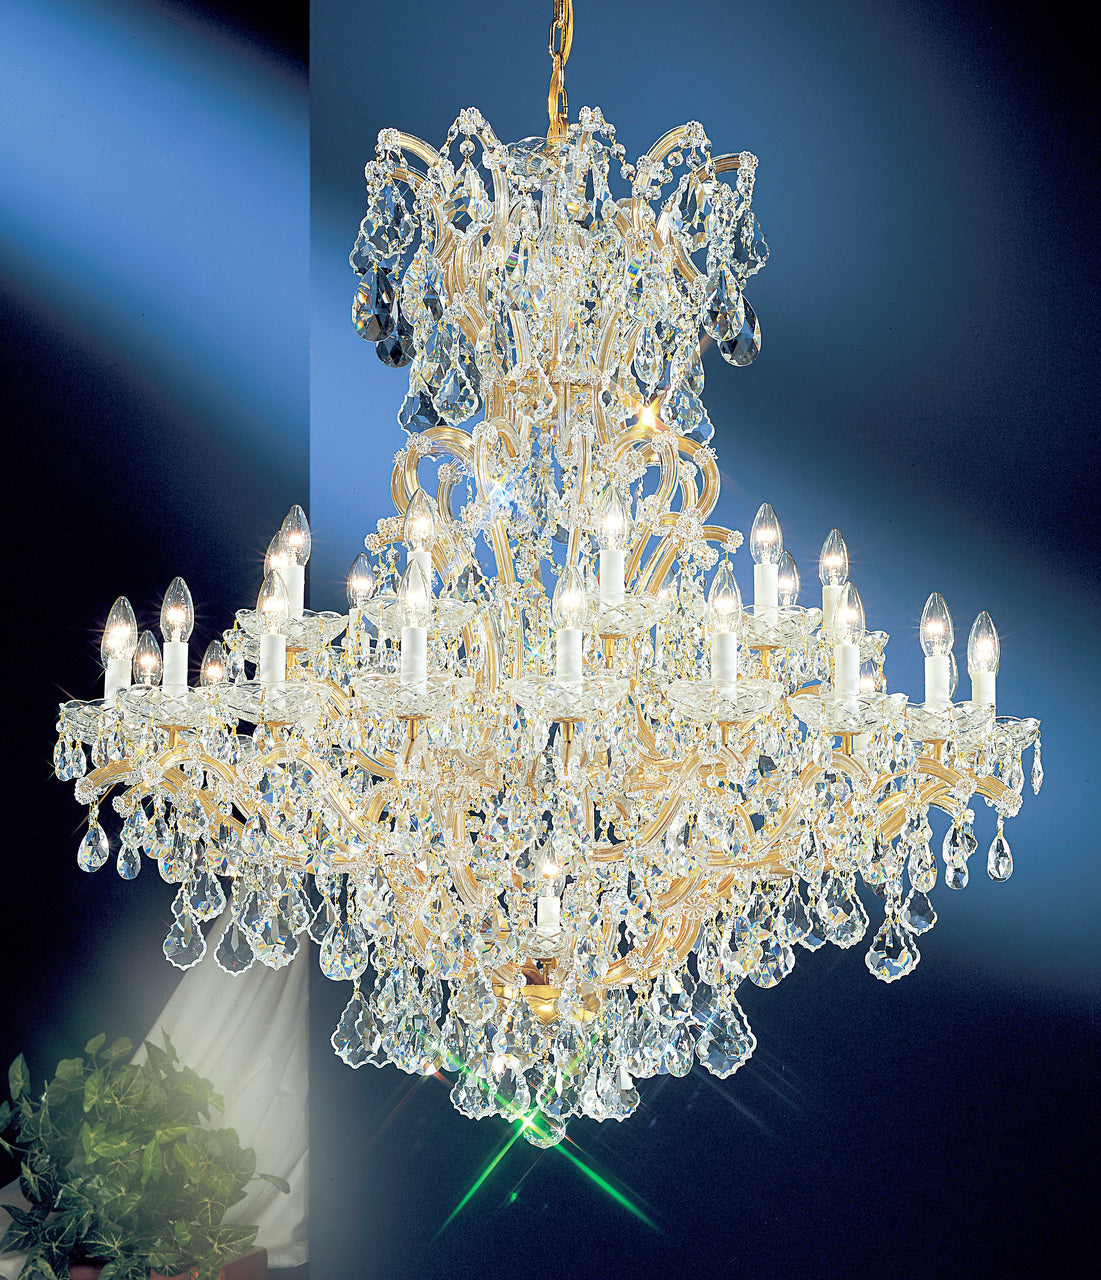 Classic Lighting 8163 OWG SC Maria Theresa Traditional Crystal Chandelier in Olde World Gold (Imported from Italy)